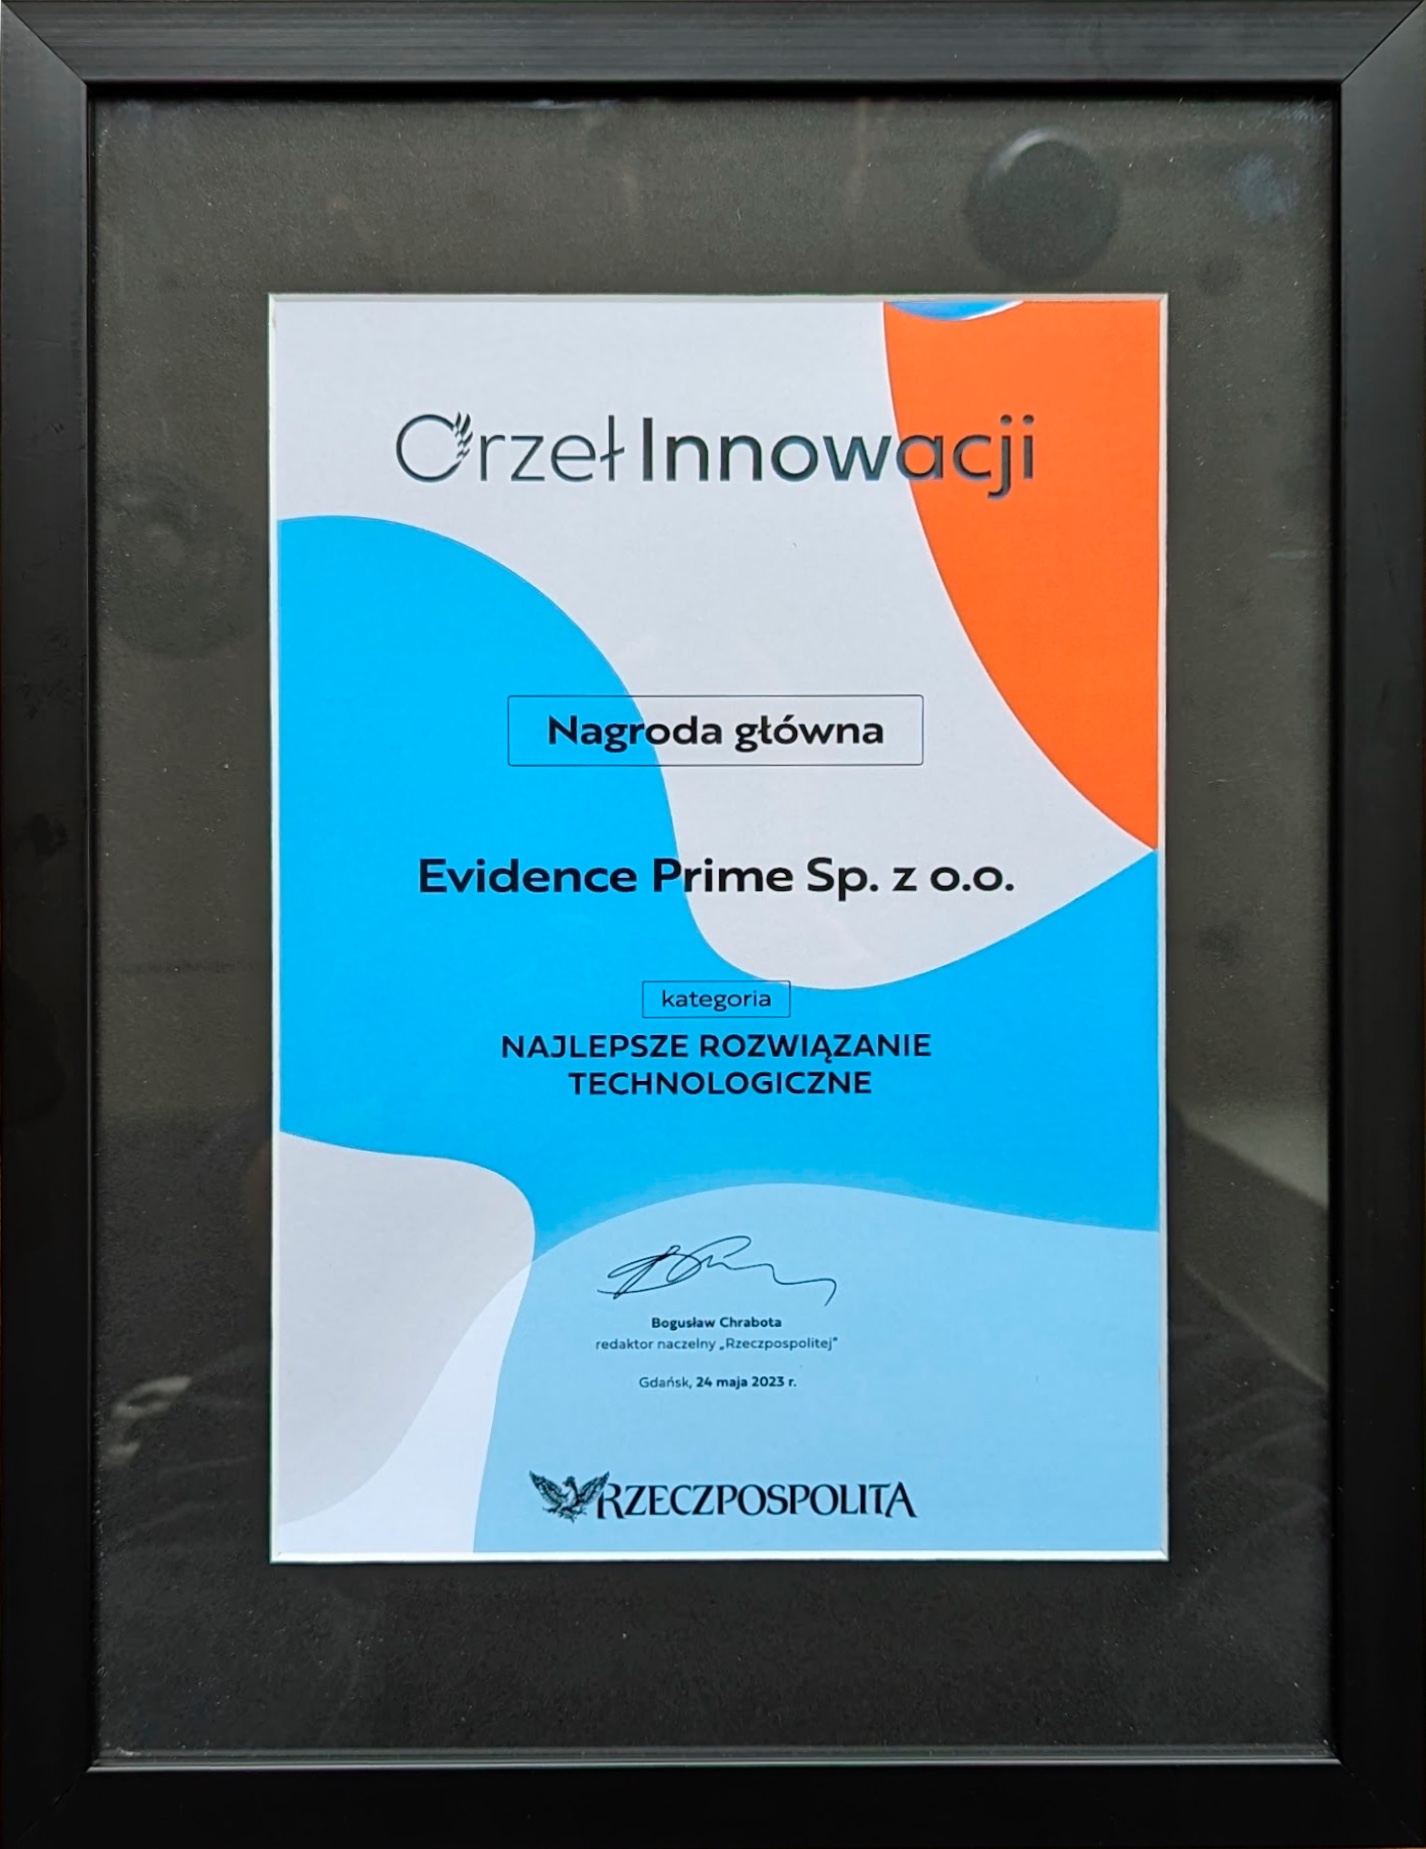 "Eagle of Innovation" certificate